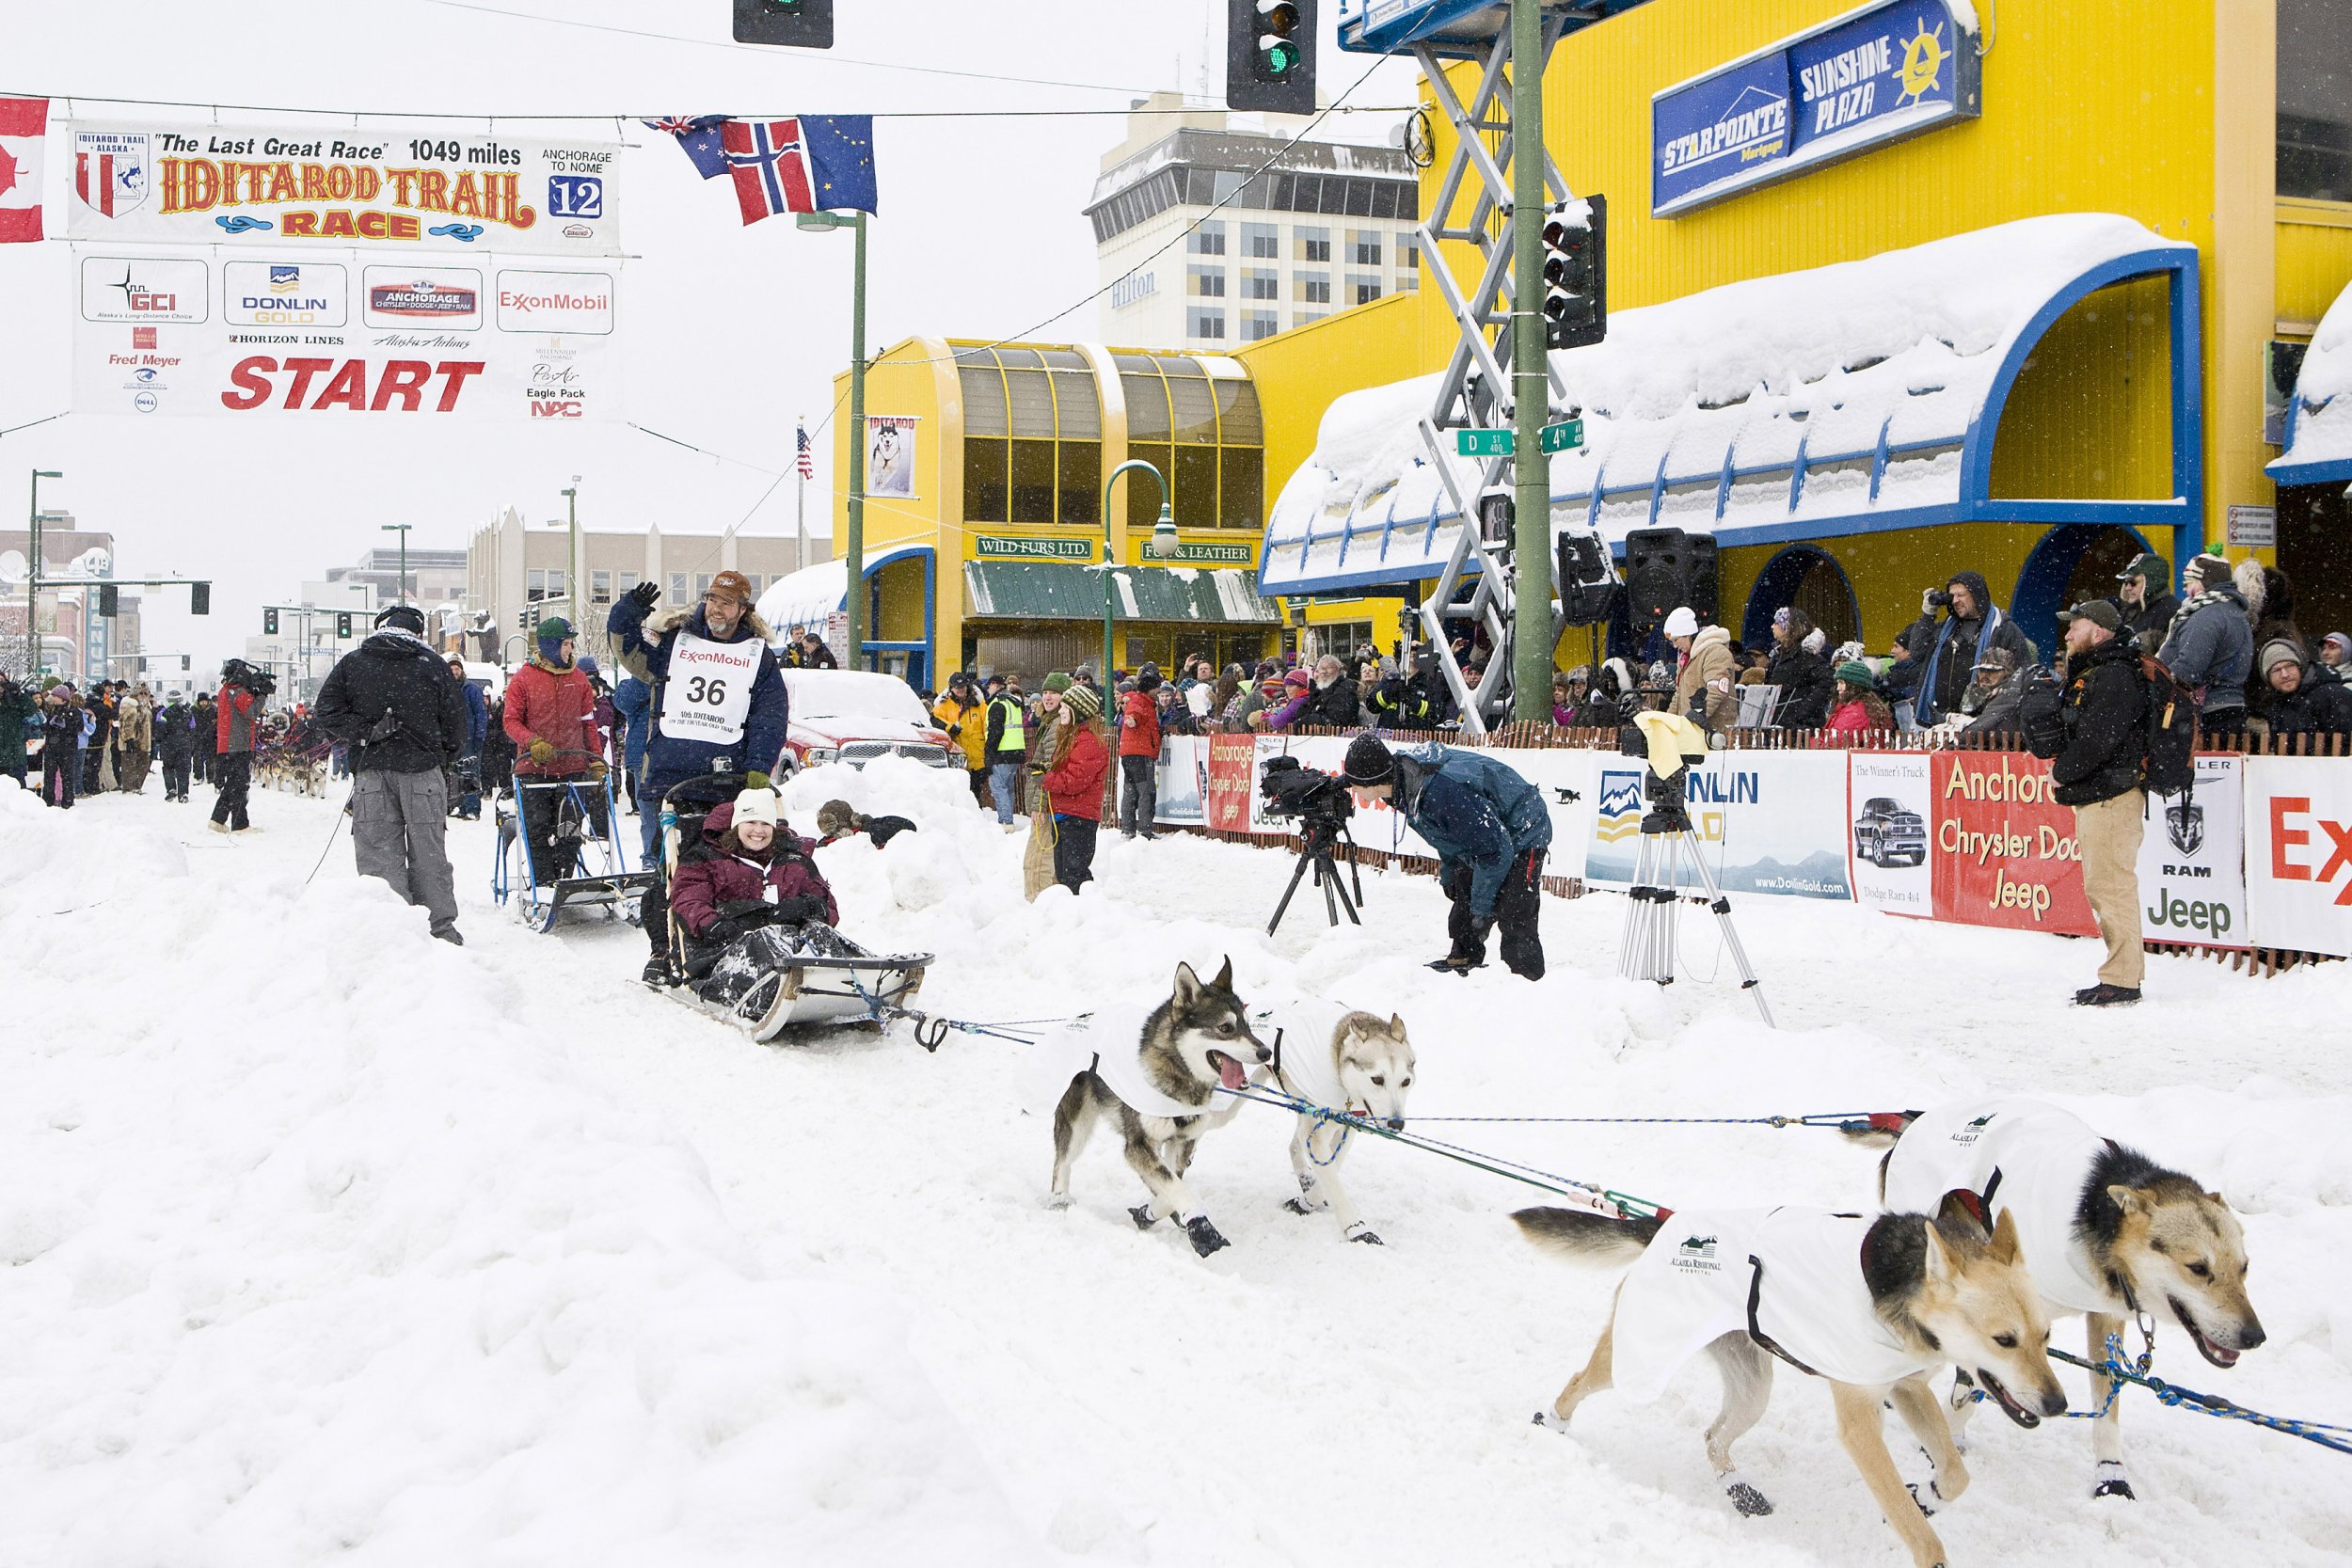 Bruce Linton, a competitor in the 40th Iditarod